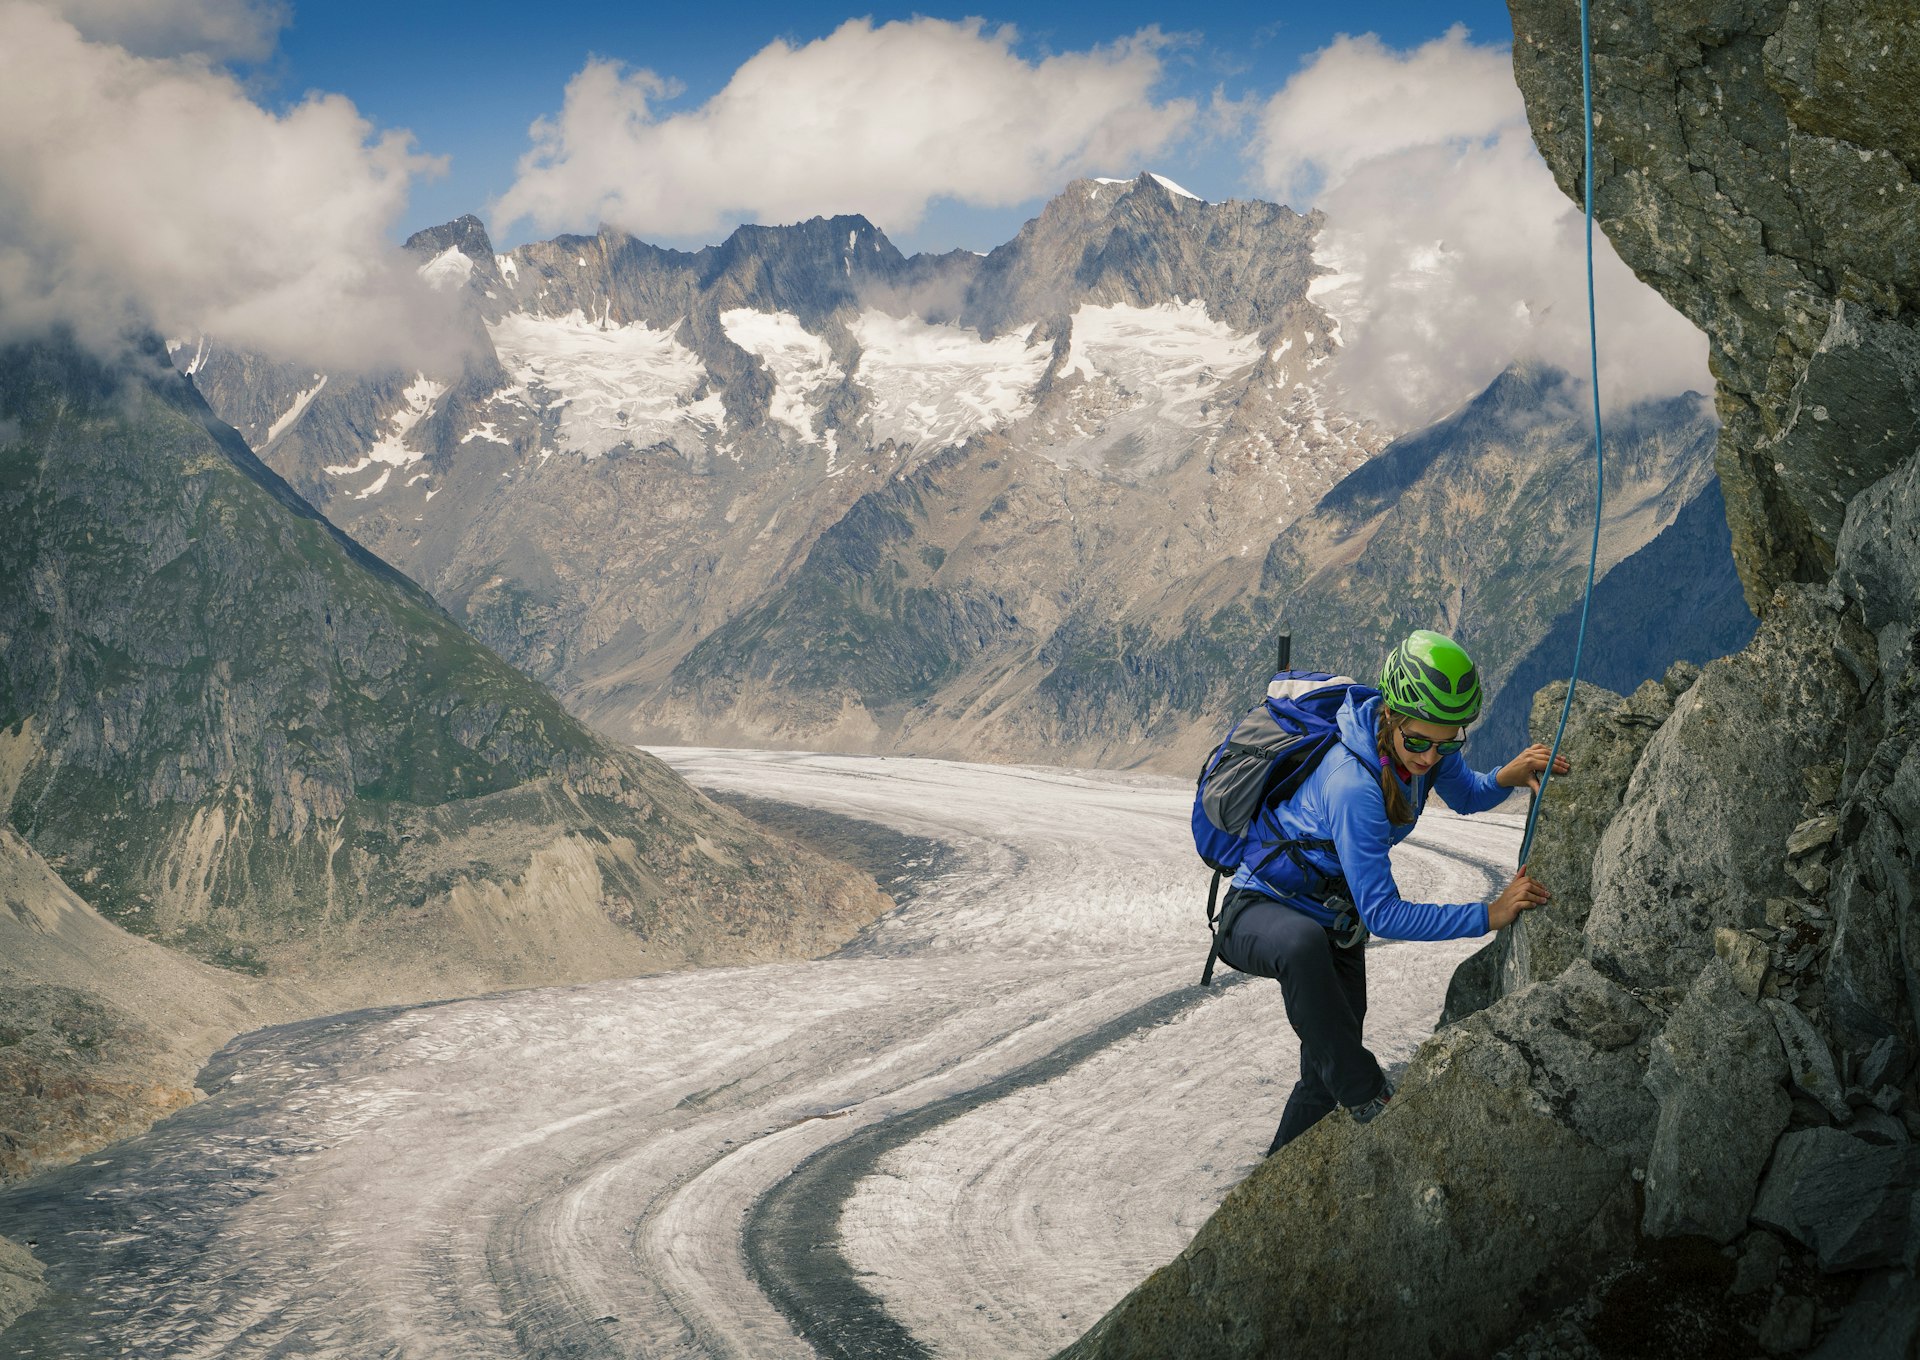 Climber on rock face over Aletsch Glacier in Switzerland